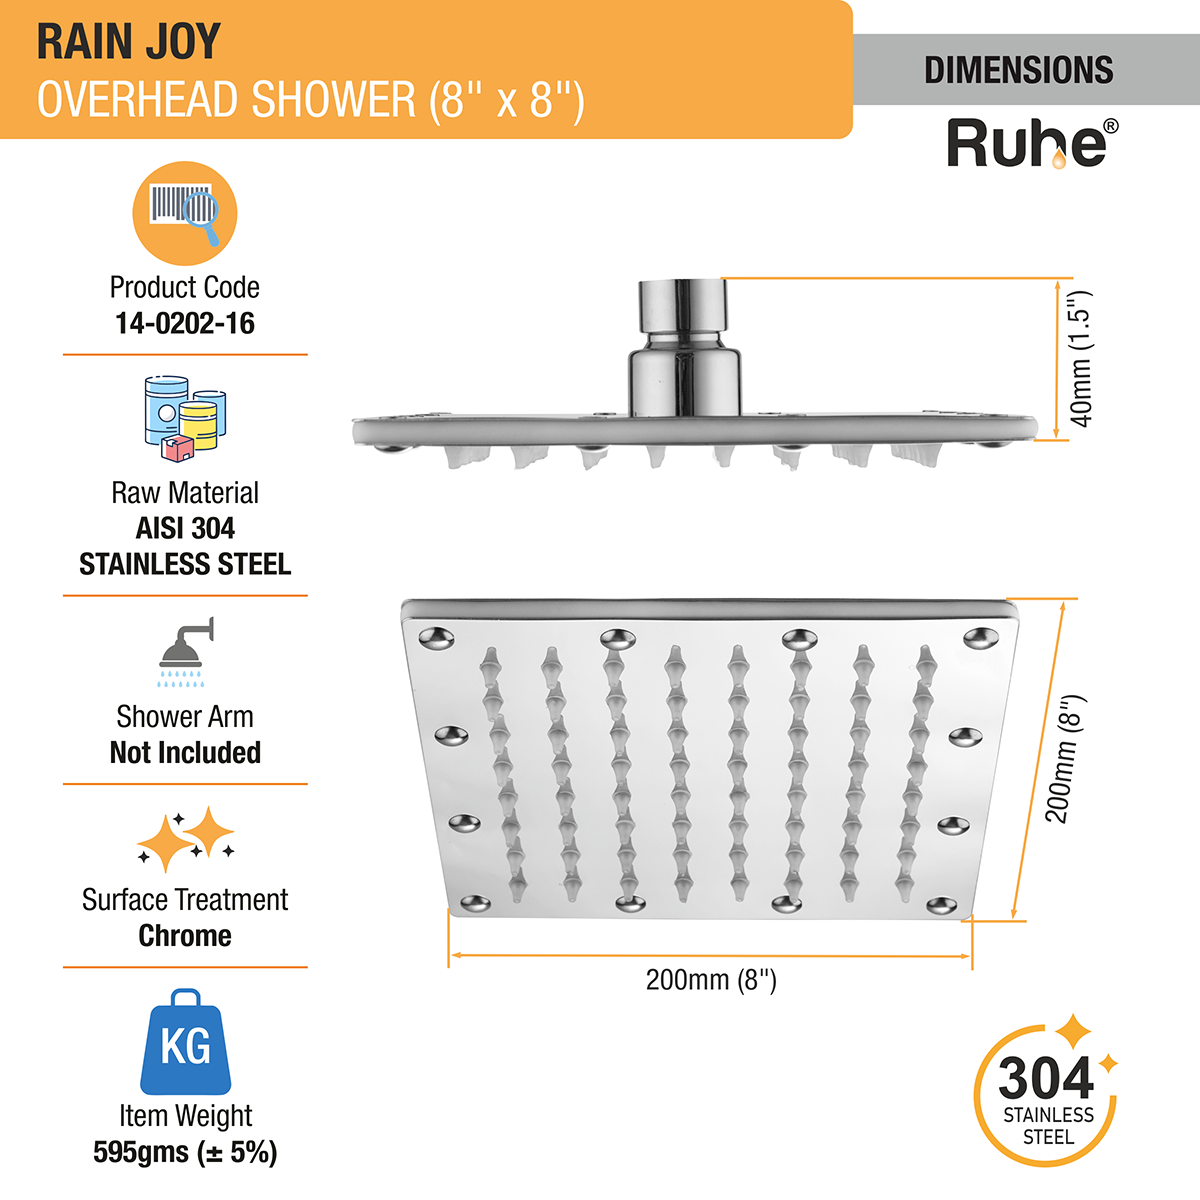 Rain Joy 304-Grade Overhead Shower (8 x 8 inches) dimensions and sizes